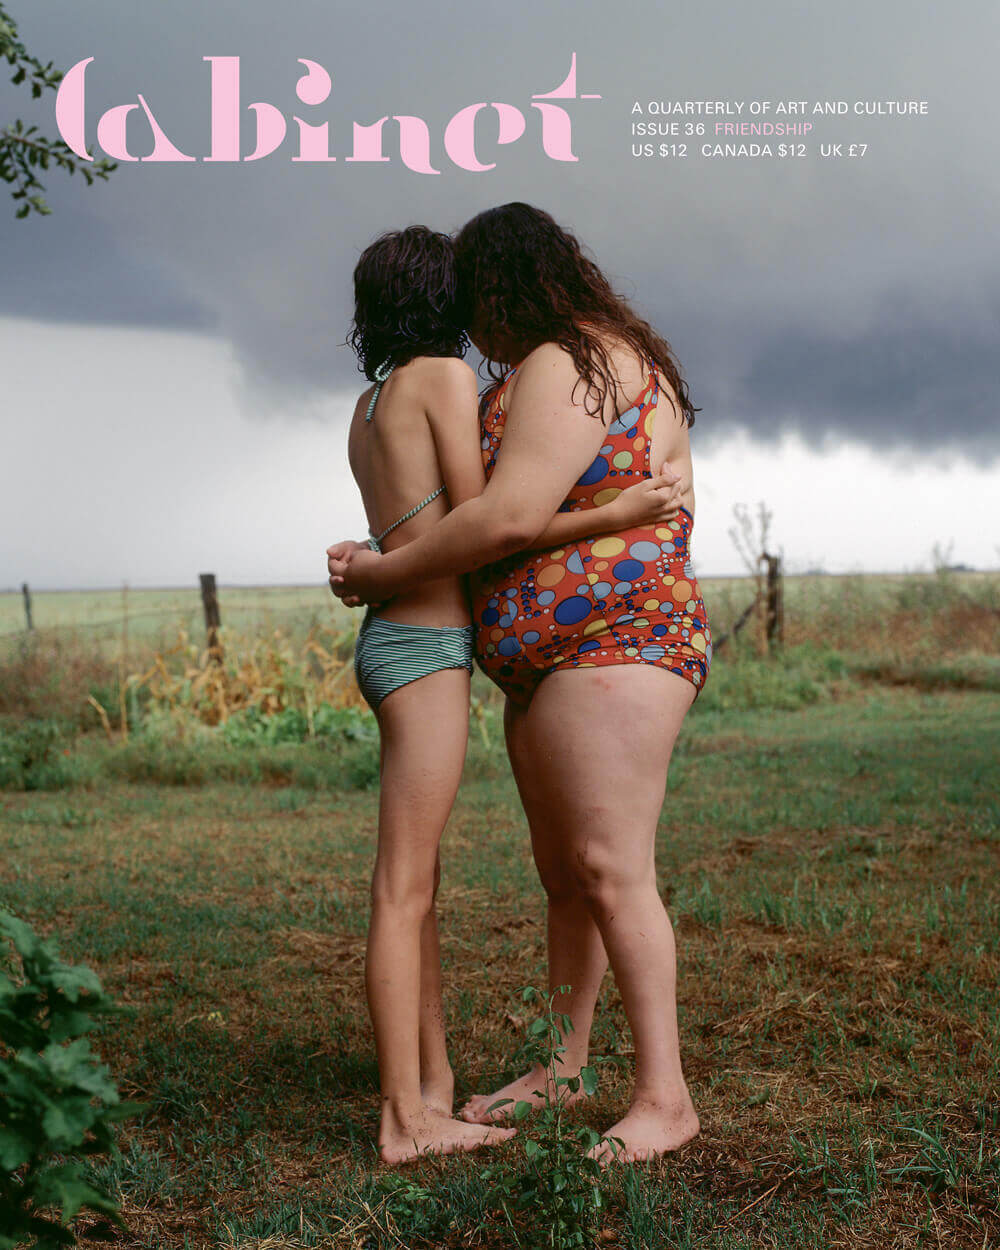 Artist Alessandra Sanguinetti’s photograph The Black Cloud from the year 2000. It depicts two young girls hugging one another while gazing out over a field.